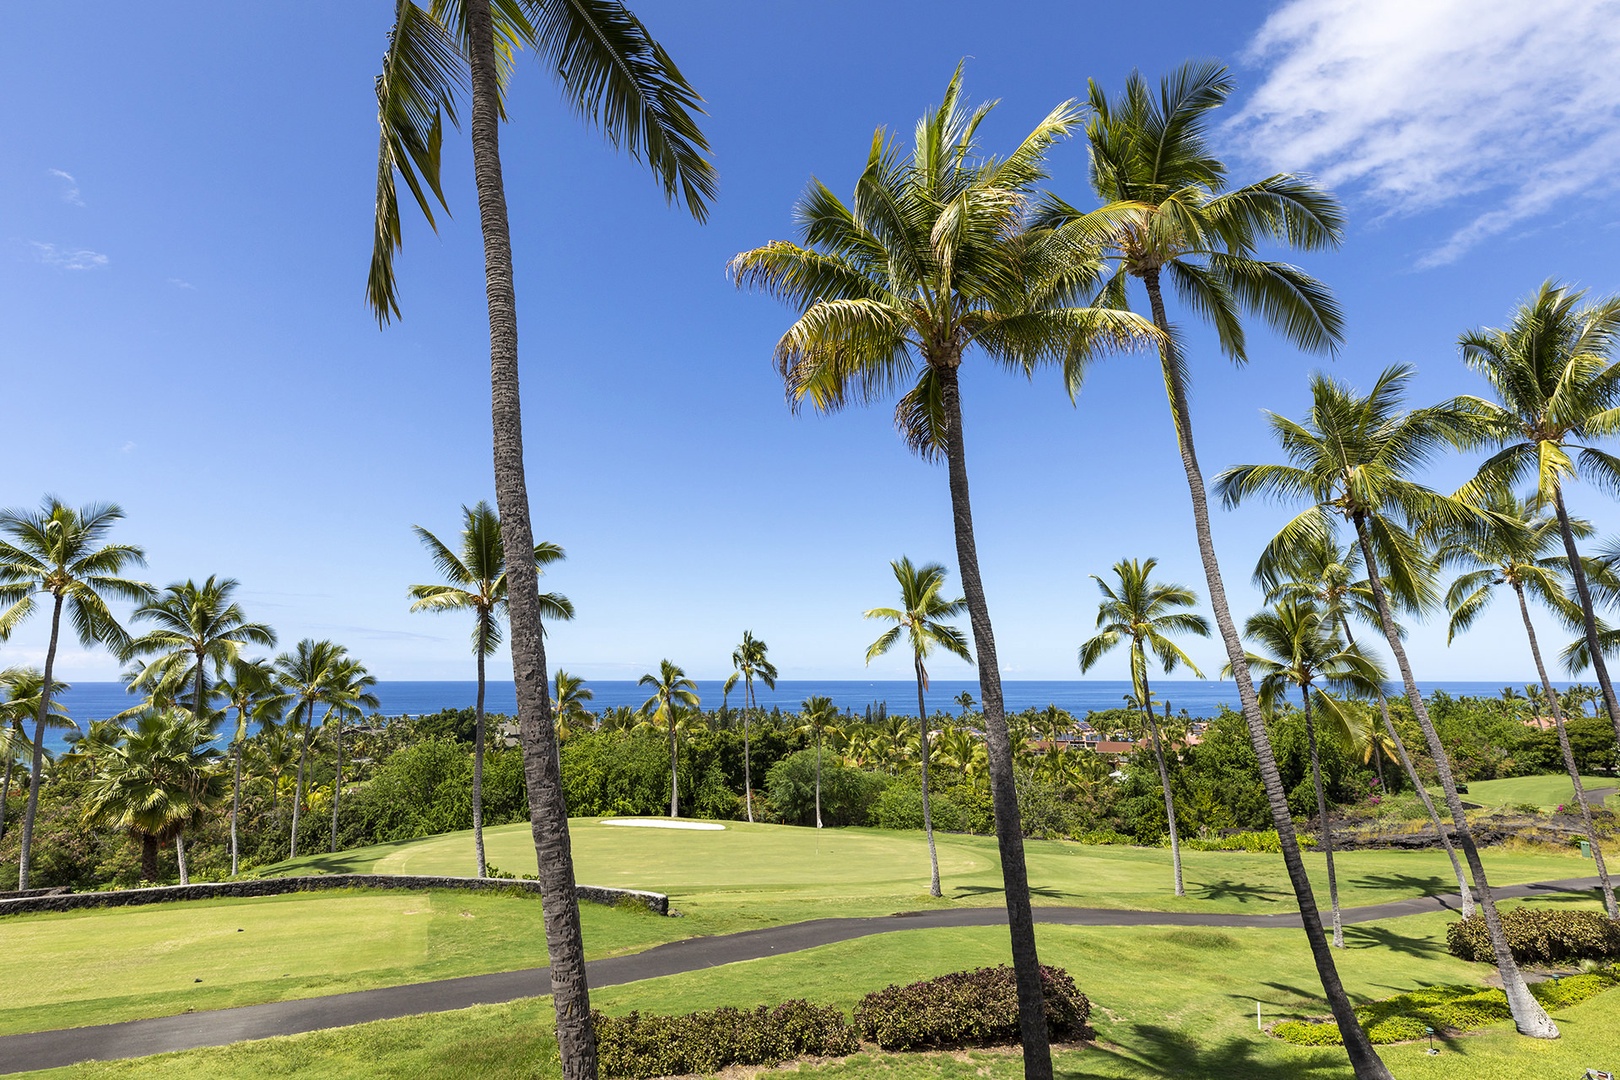 Golf course and ocean views from the lanai